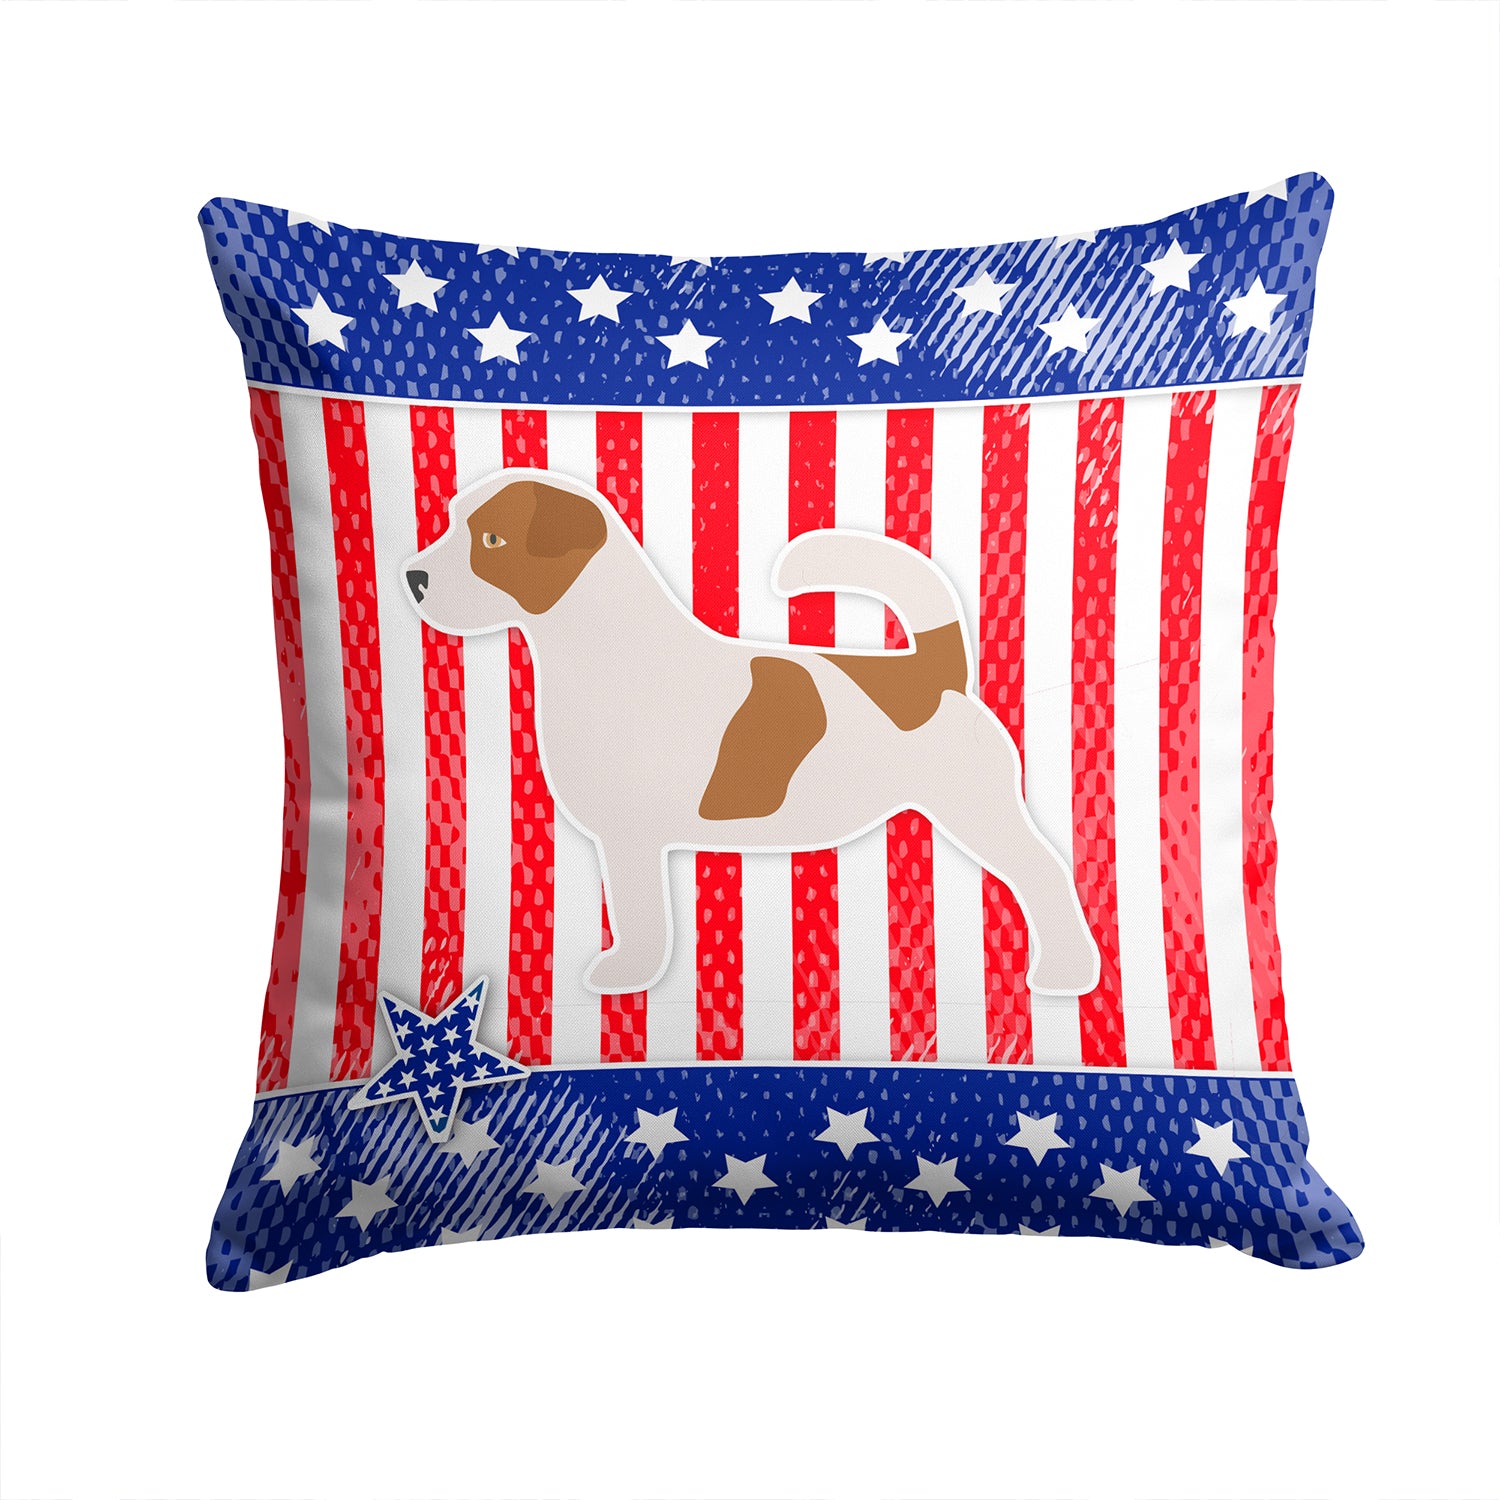 USA Patriotic Jack Russell Terrier Fabric Decorative Pillow BB3307PW1414 - the-store.com